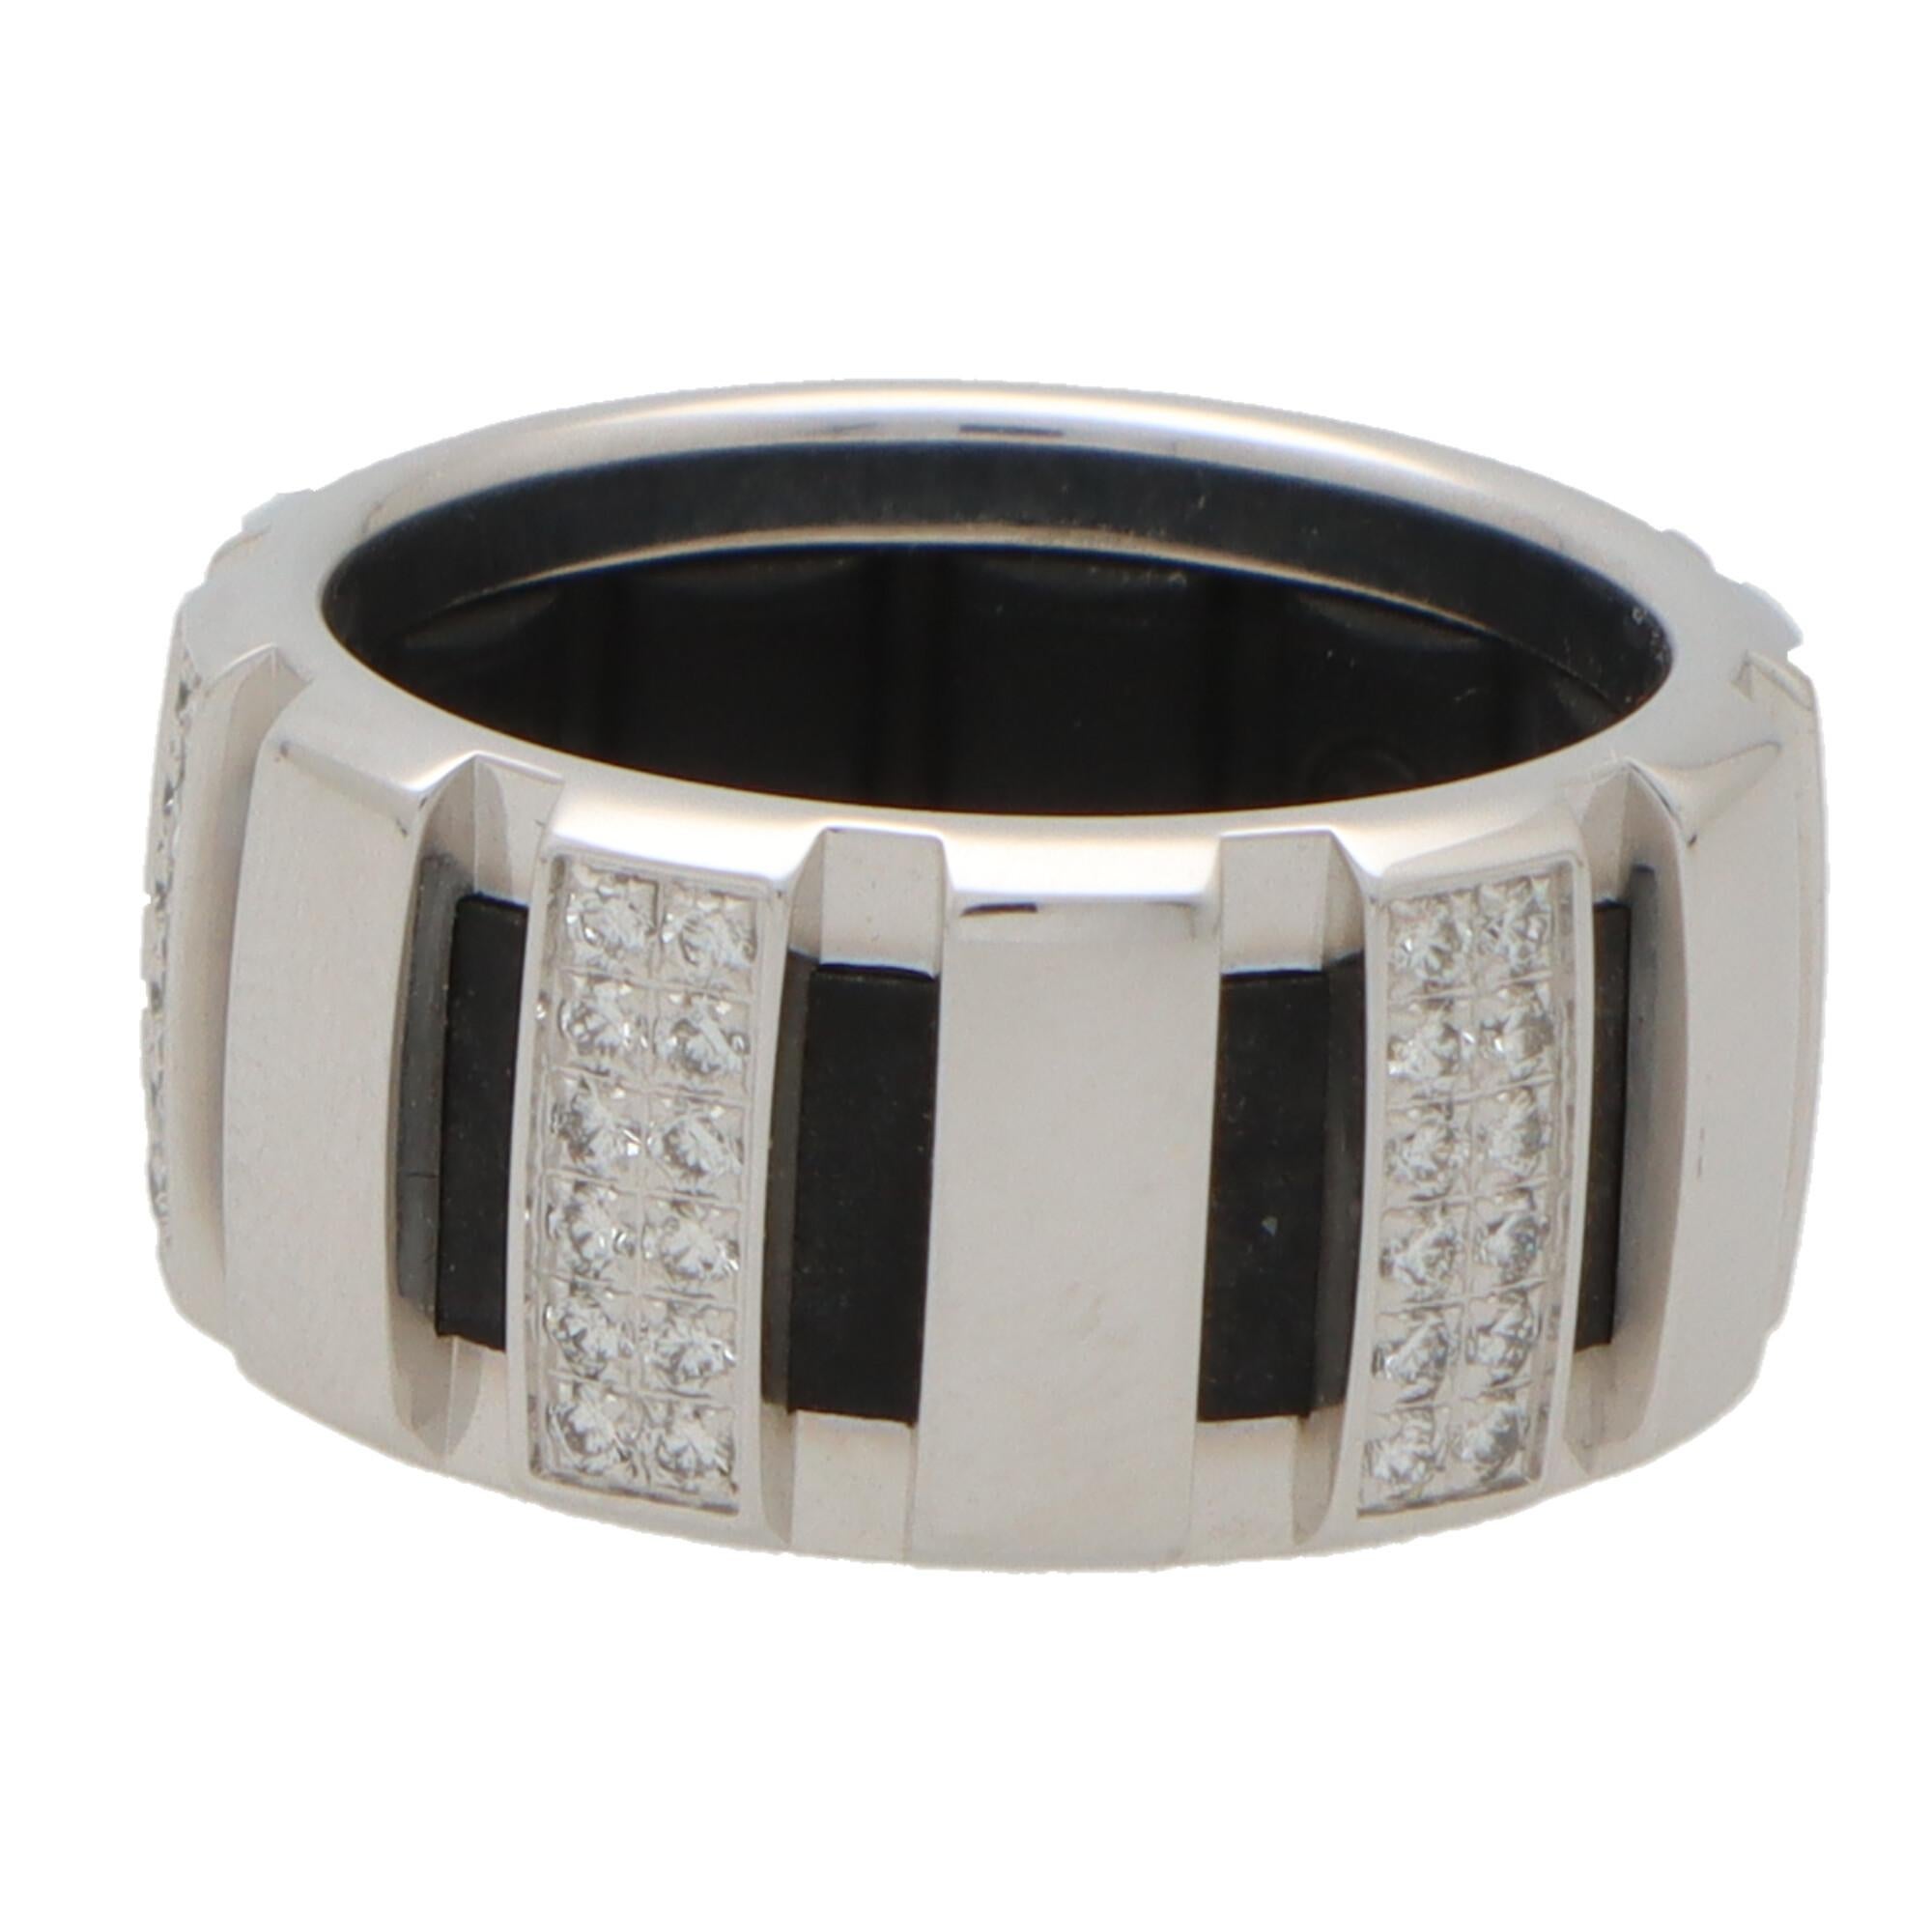 bague chaumet class one